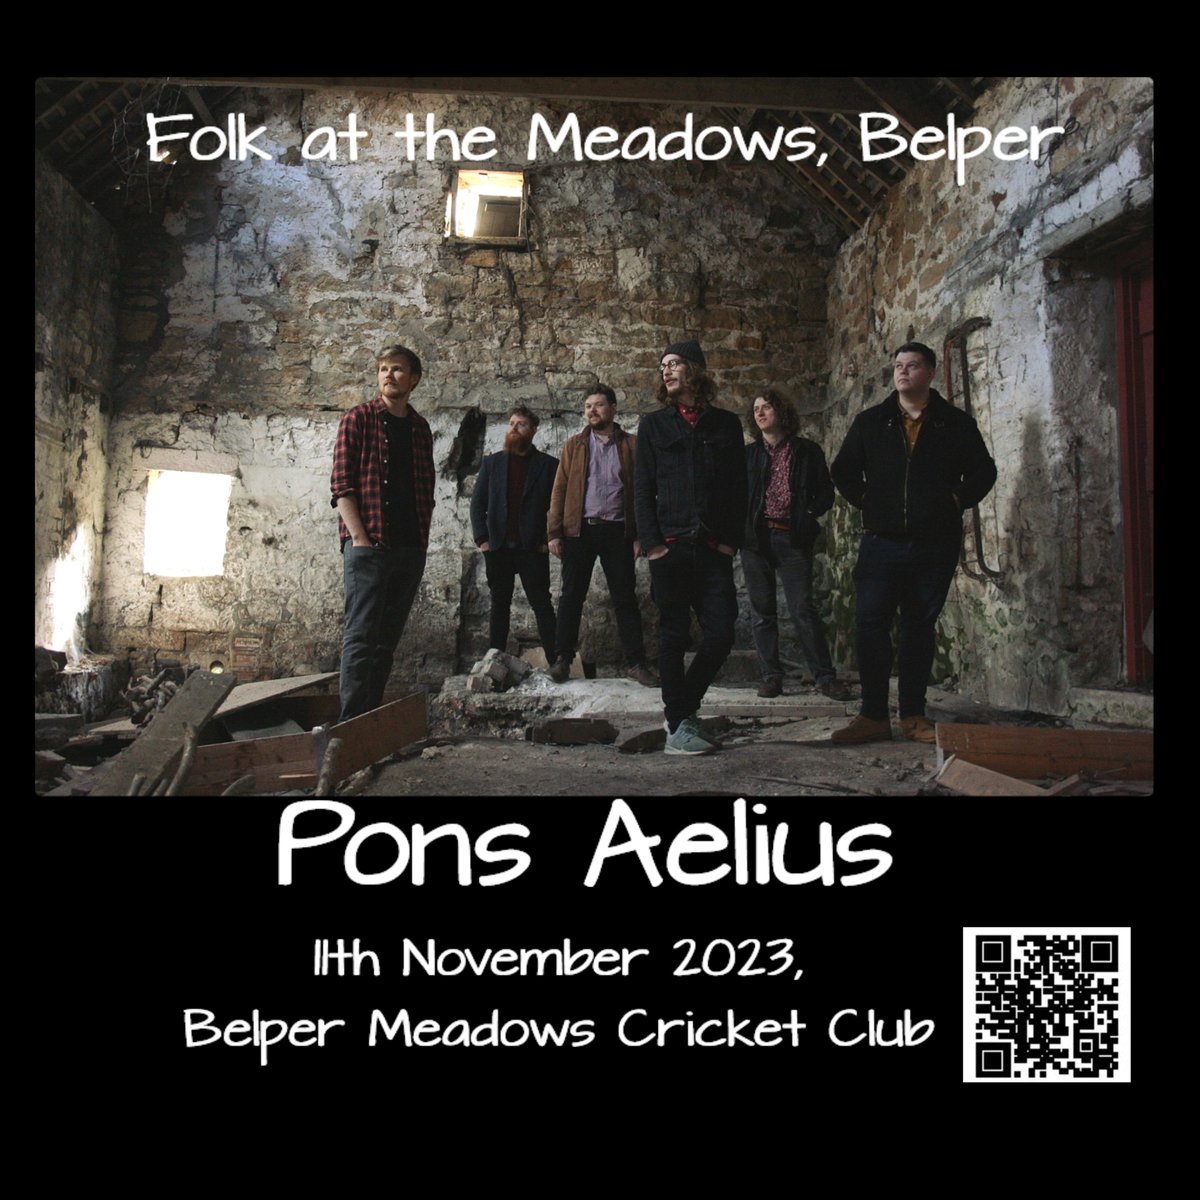 The wonderful PONS AELIUS @ponsaeliusmusic are with us here in Belper at 'Folk at the Meadows' tomorrow 11/11/23, this is an opportunity not to be missed Tickets are available here: wegottickets.com/event/590361